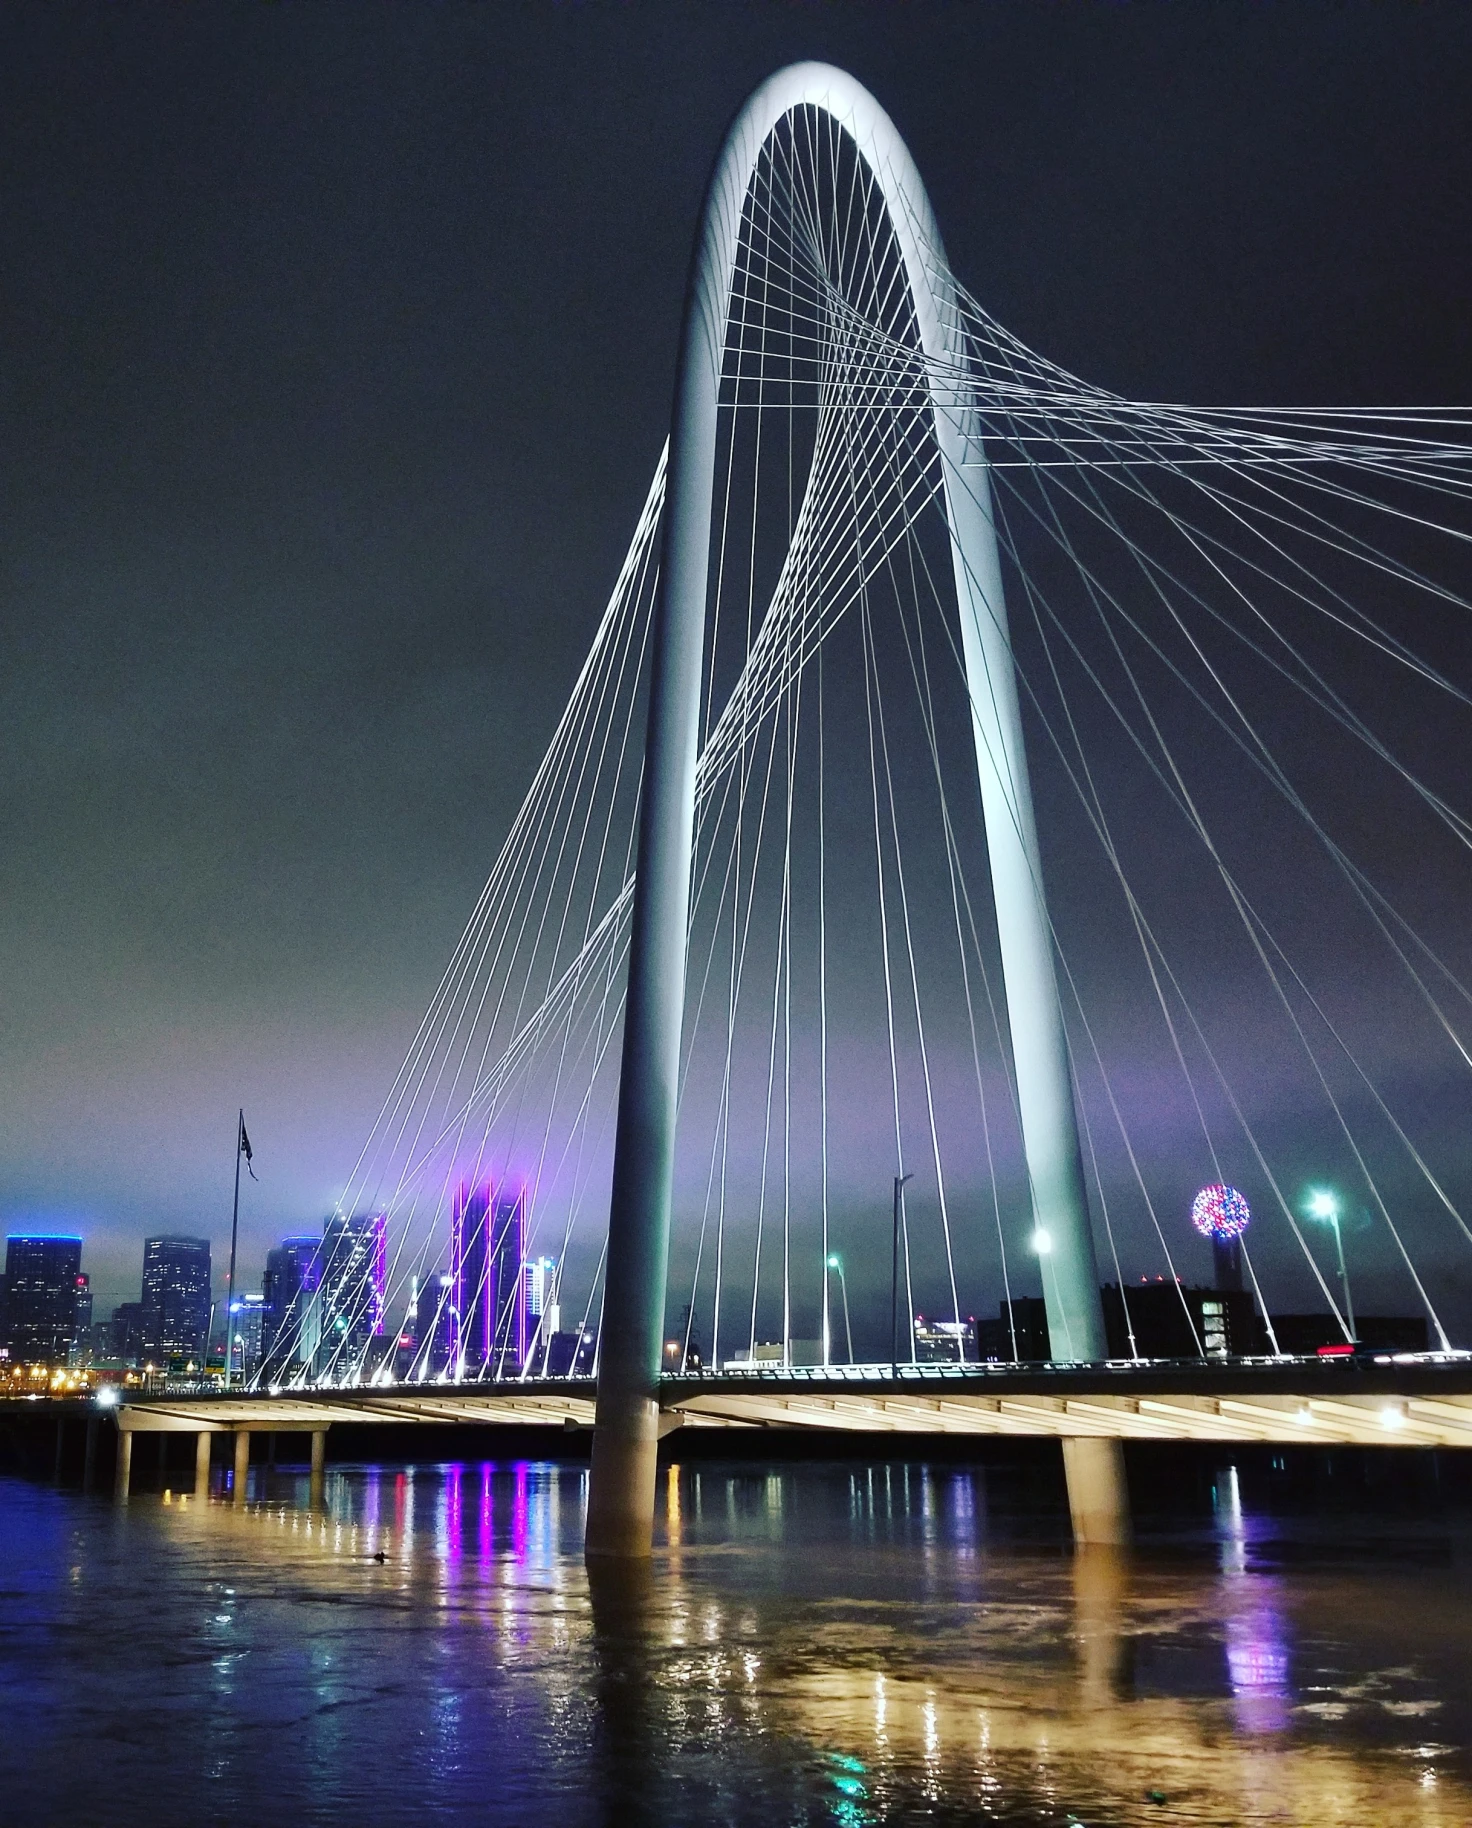 The Ronald Kirk Pedestrian Bridge is a stunning architectural landmark spanning the Trinity River in Dallas, Texas, offering pedestrians and cyclists picturesque views of the city's skyline.